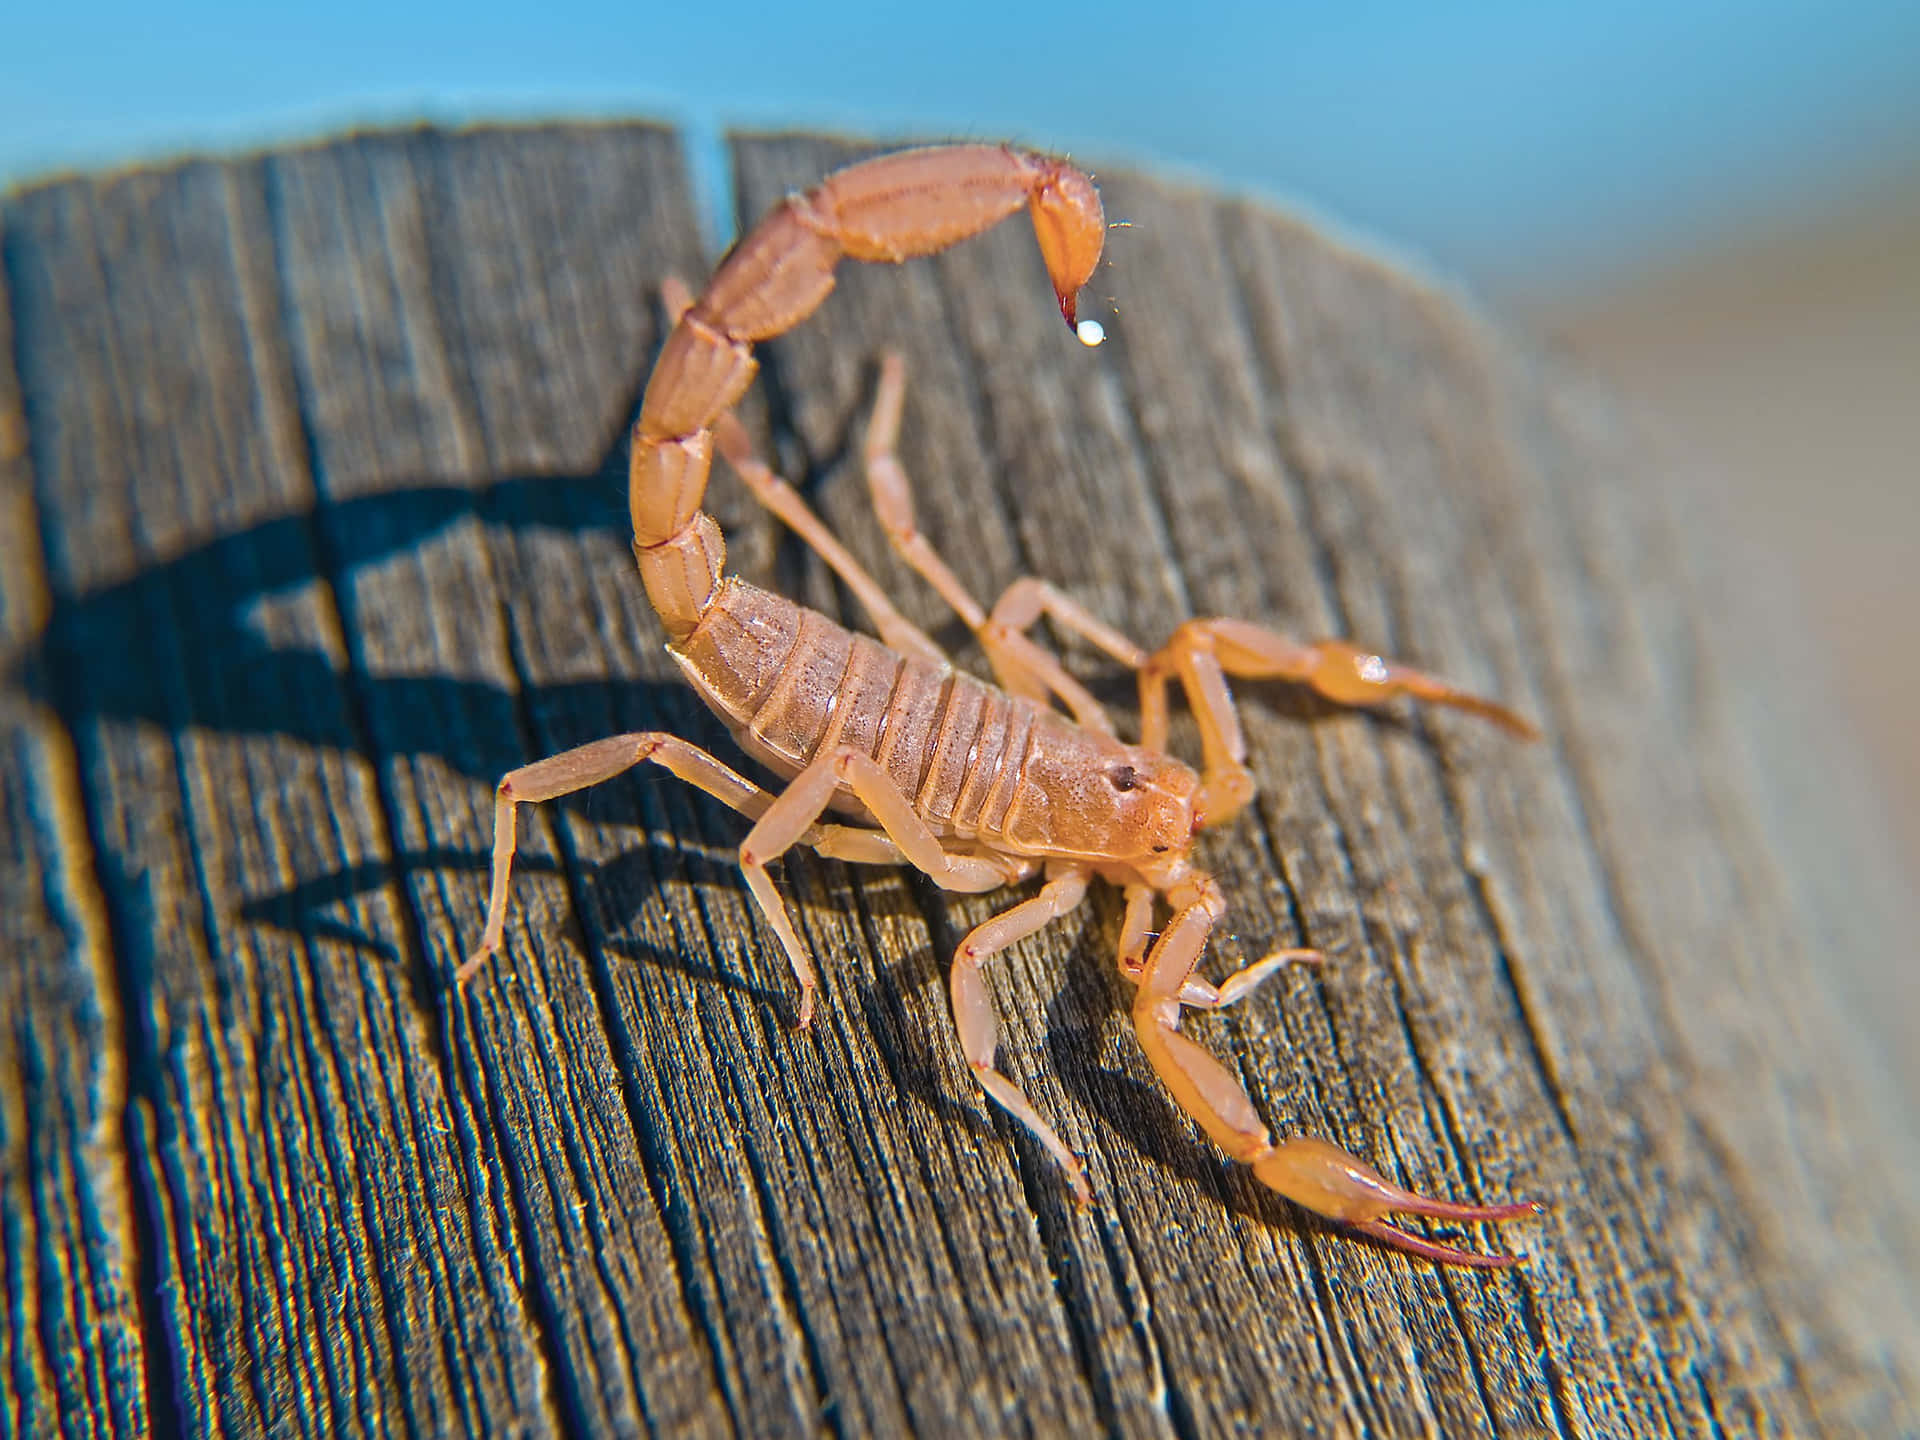 A close-up of a scorpion on a rock